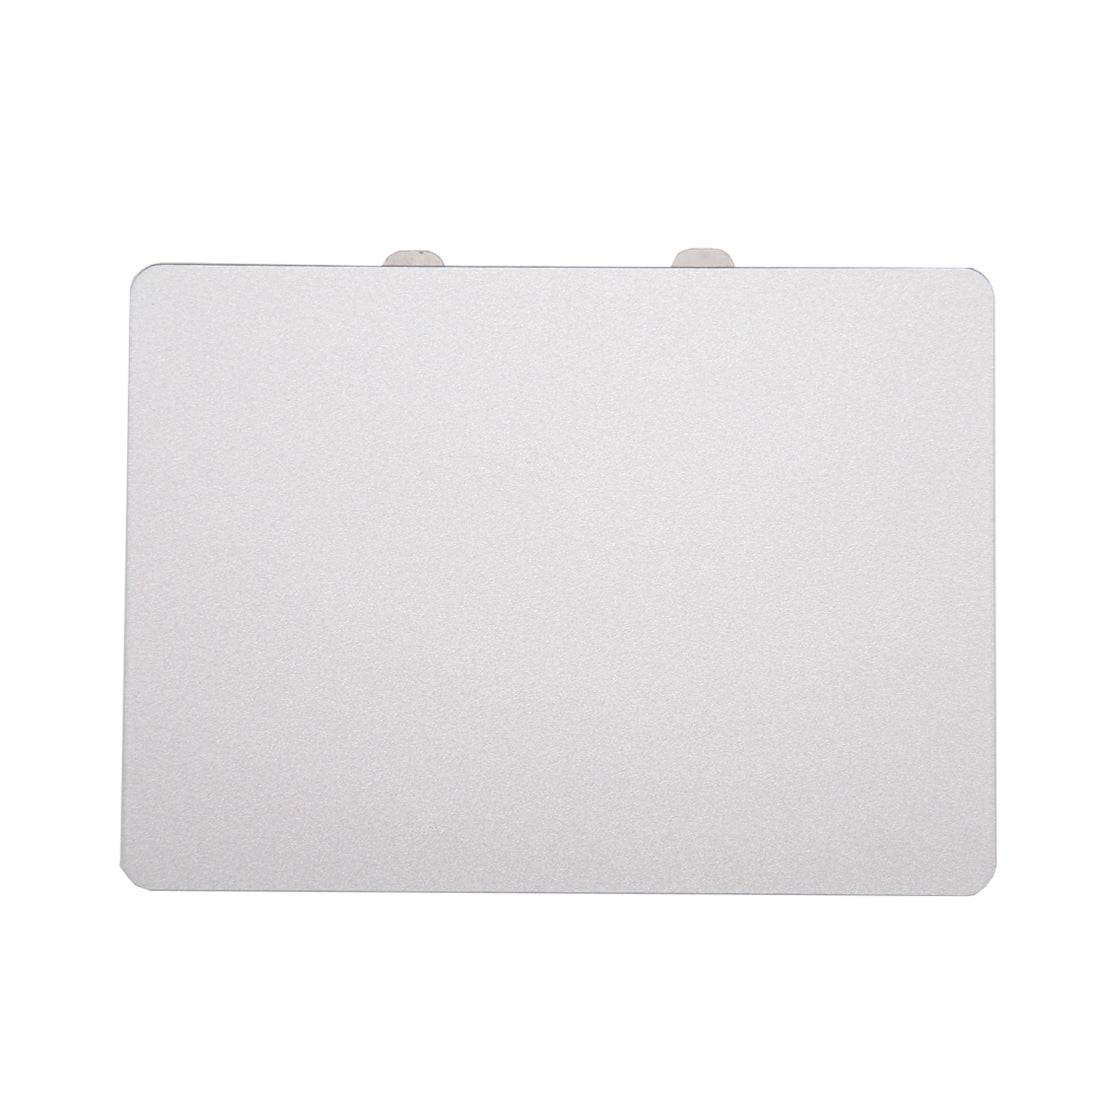 TouchPad Touchpad Apple MacBook Pro 13.3 A1278 2009 2012